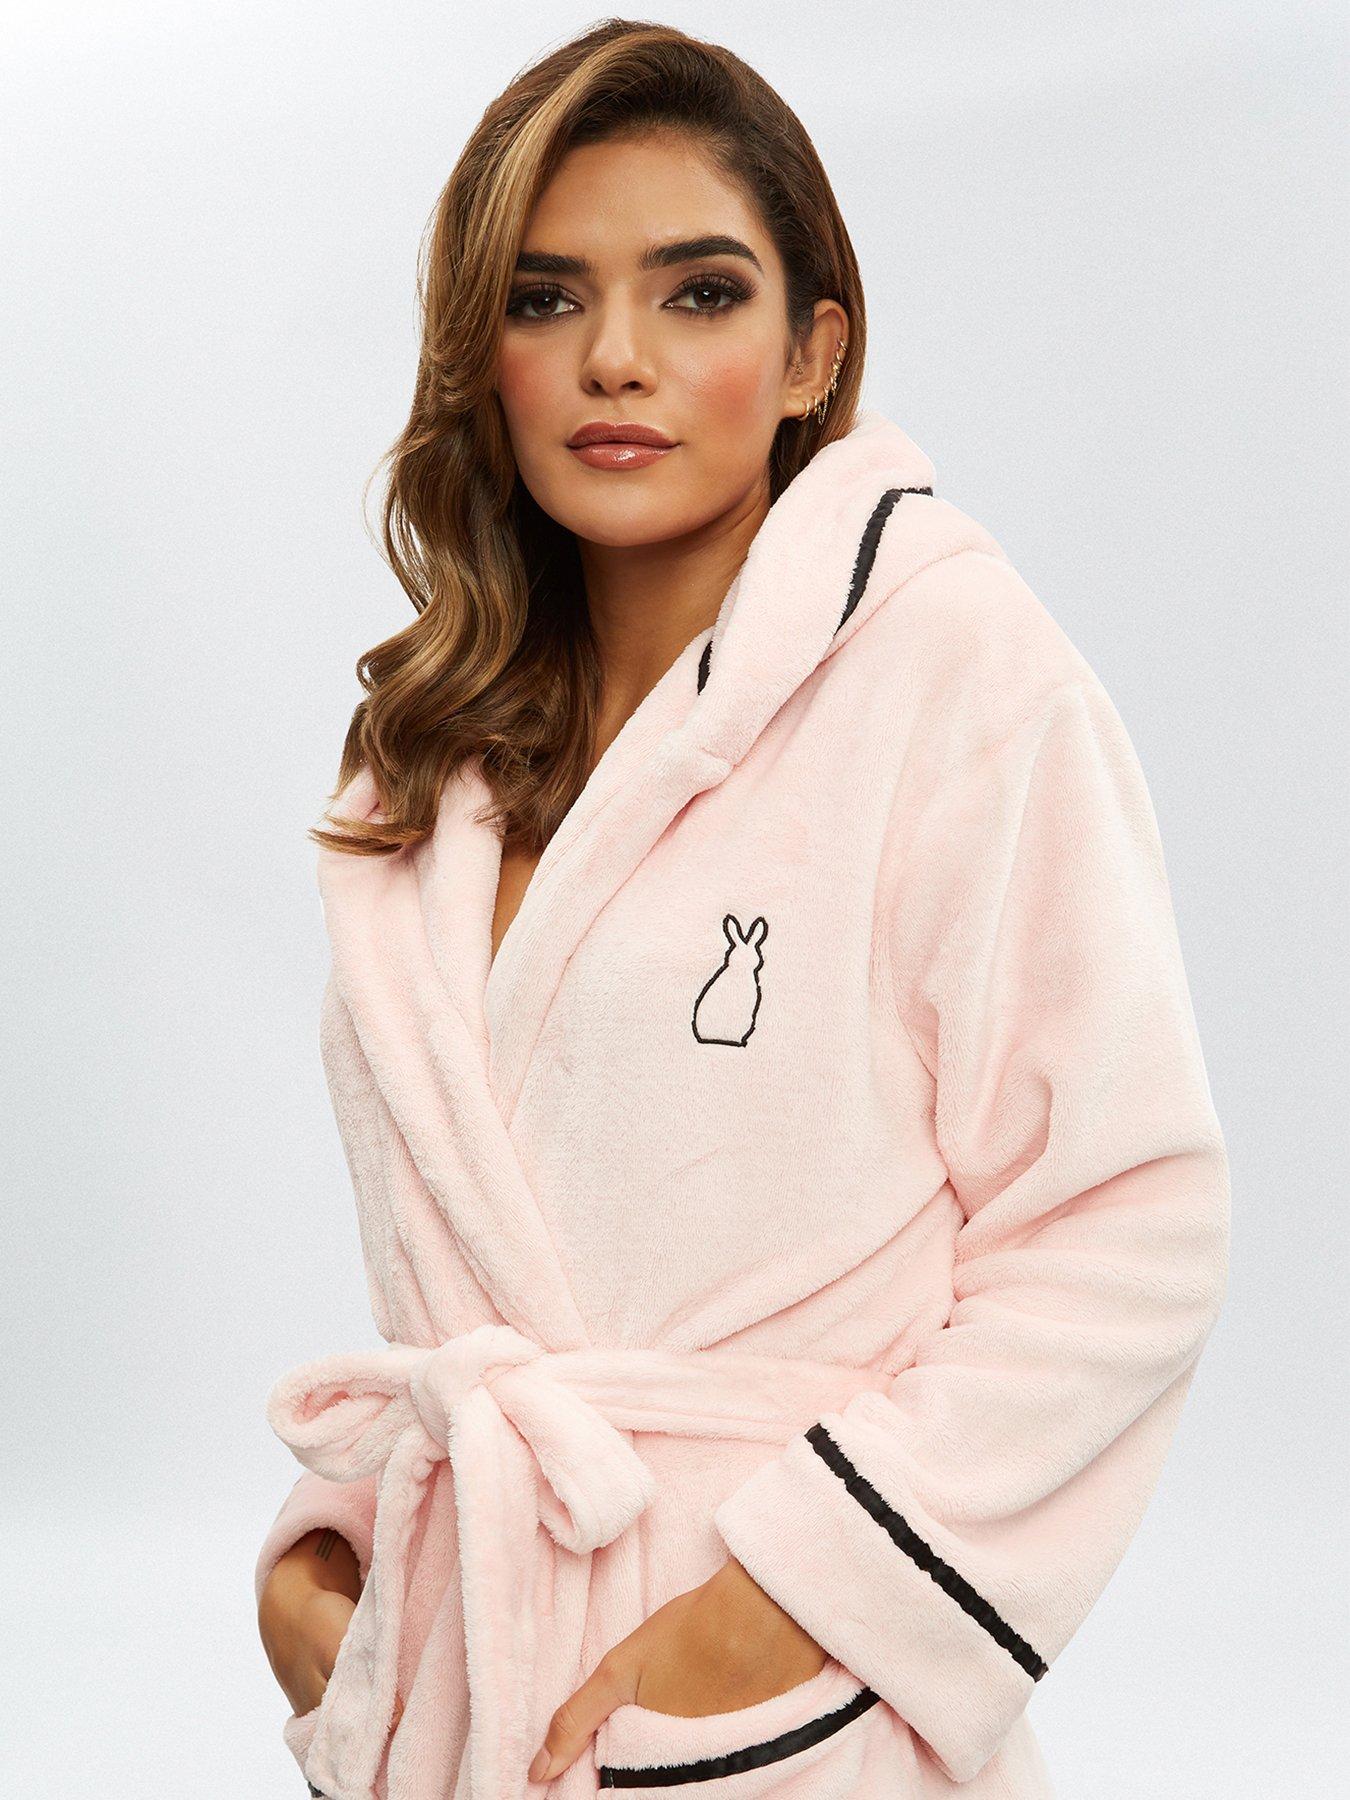 Ann Summers Ann Summers VIP By Invite Only Dressing Gown PINK Size UK 10-12  EUR 36-38 